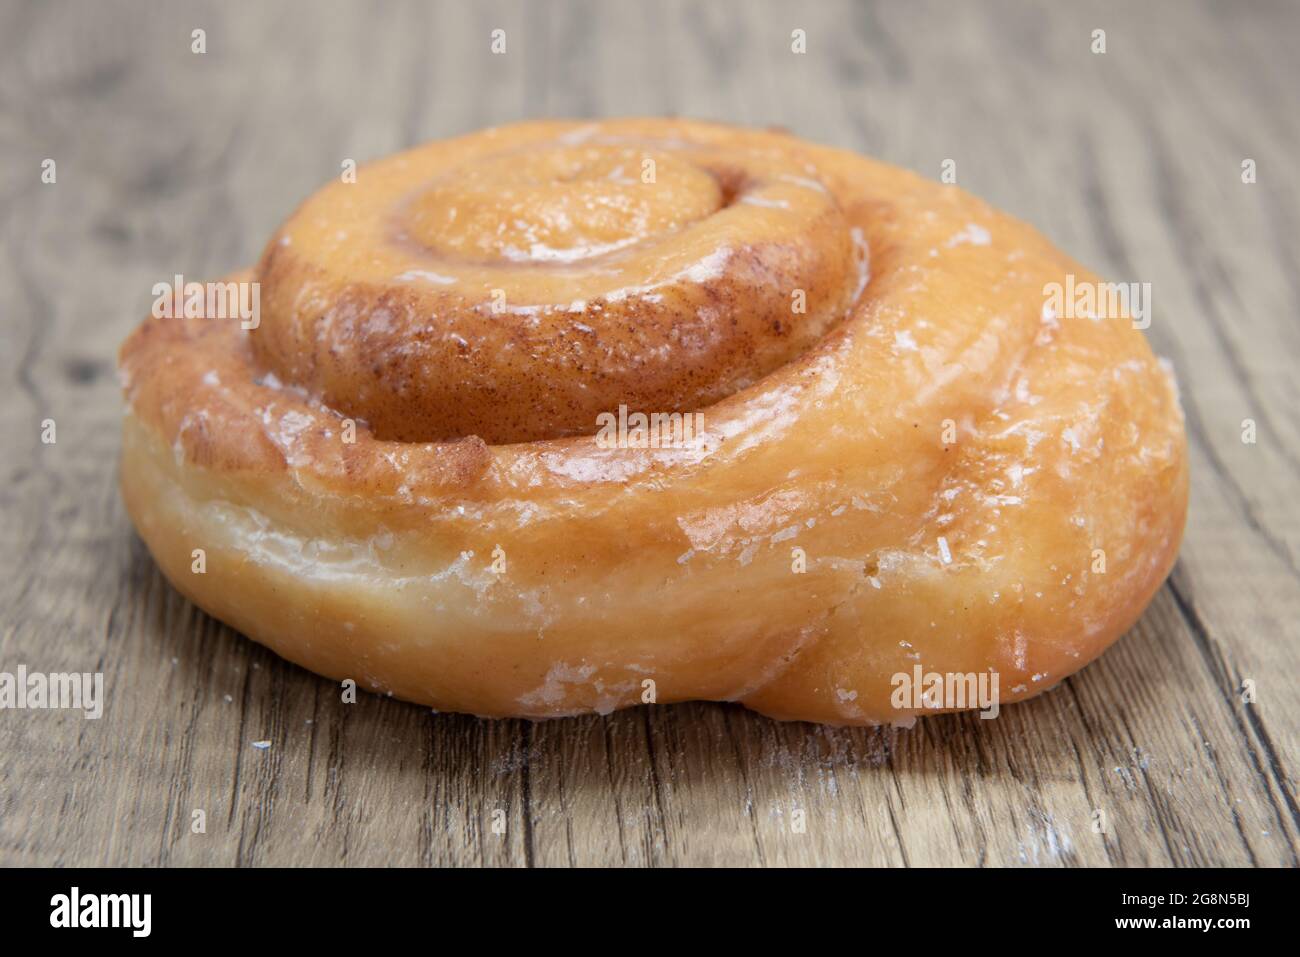 Cinnamon roll donut is textured with glazed coating for a sweet treat delight. Stock Photo